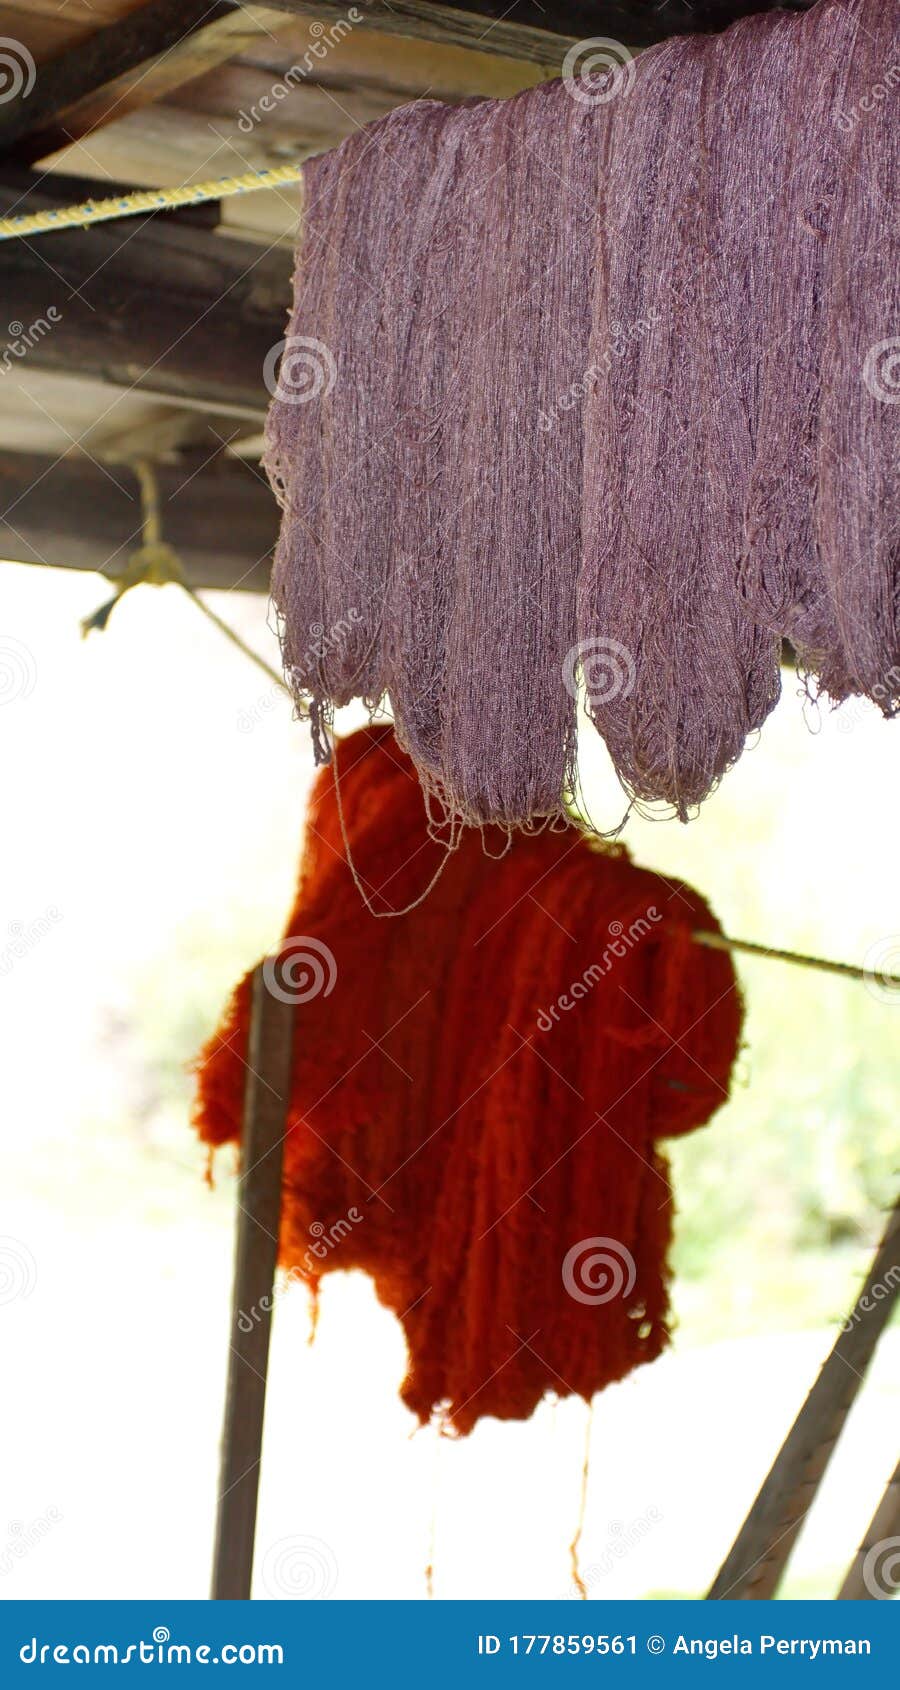 dyed thread hanging to dry